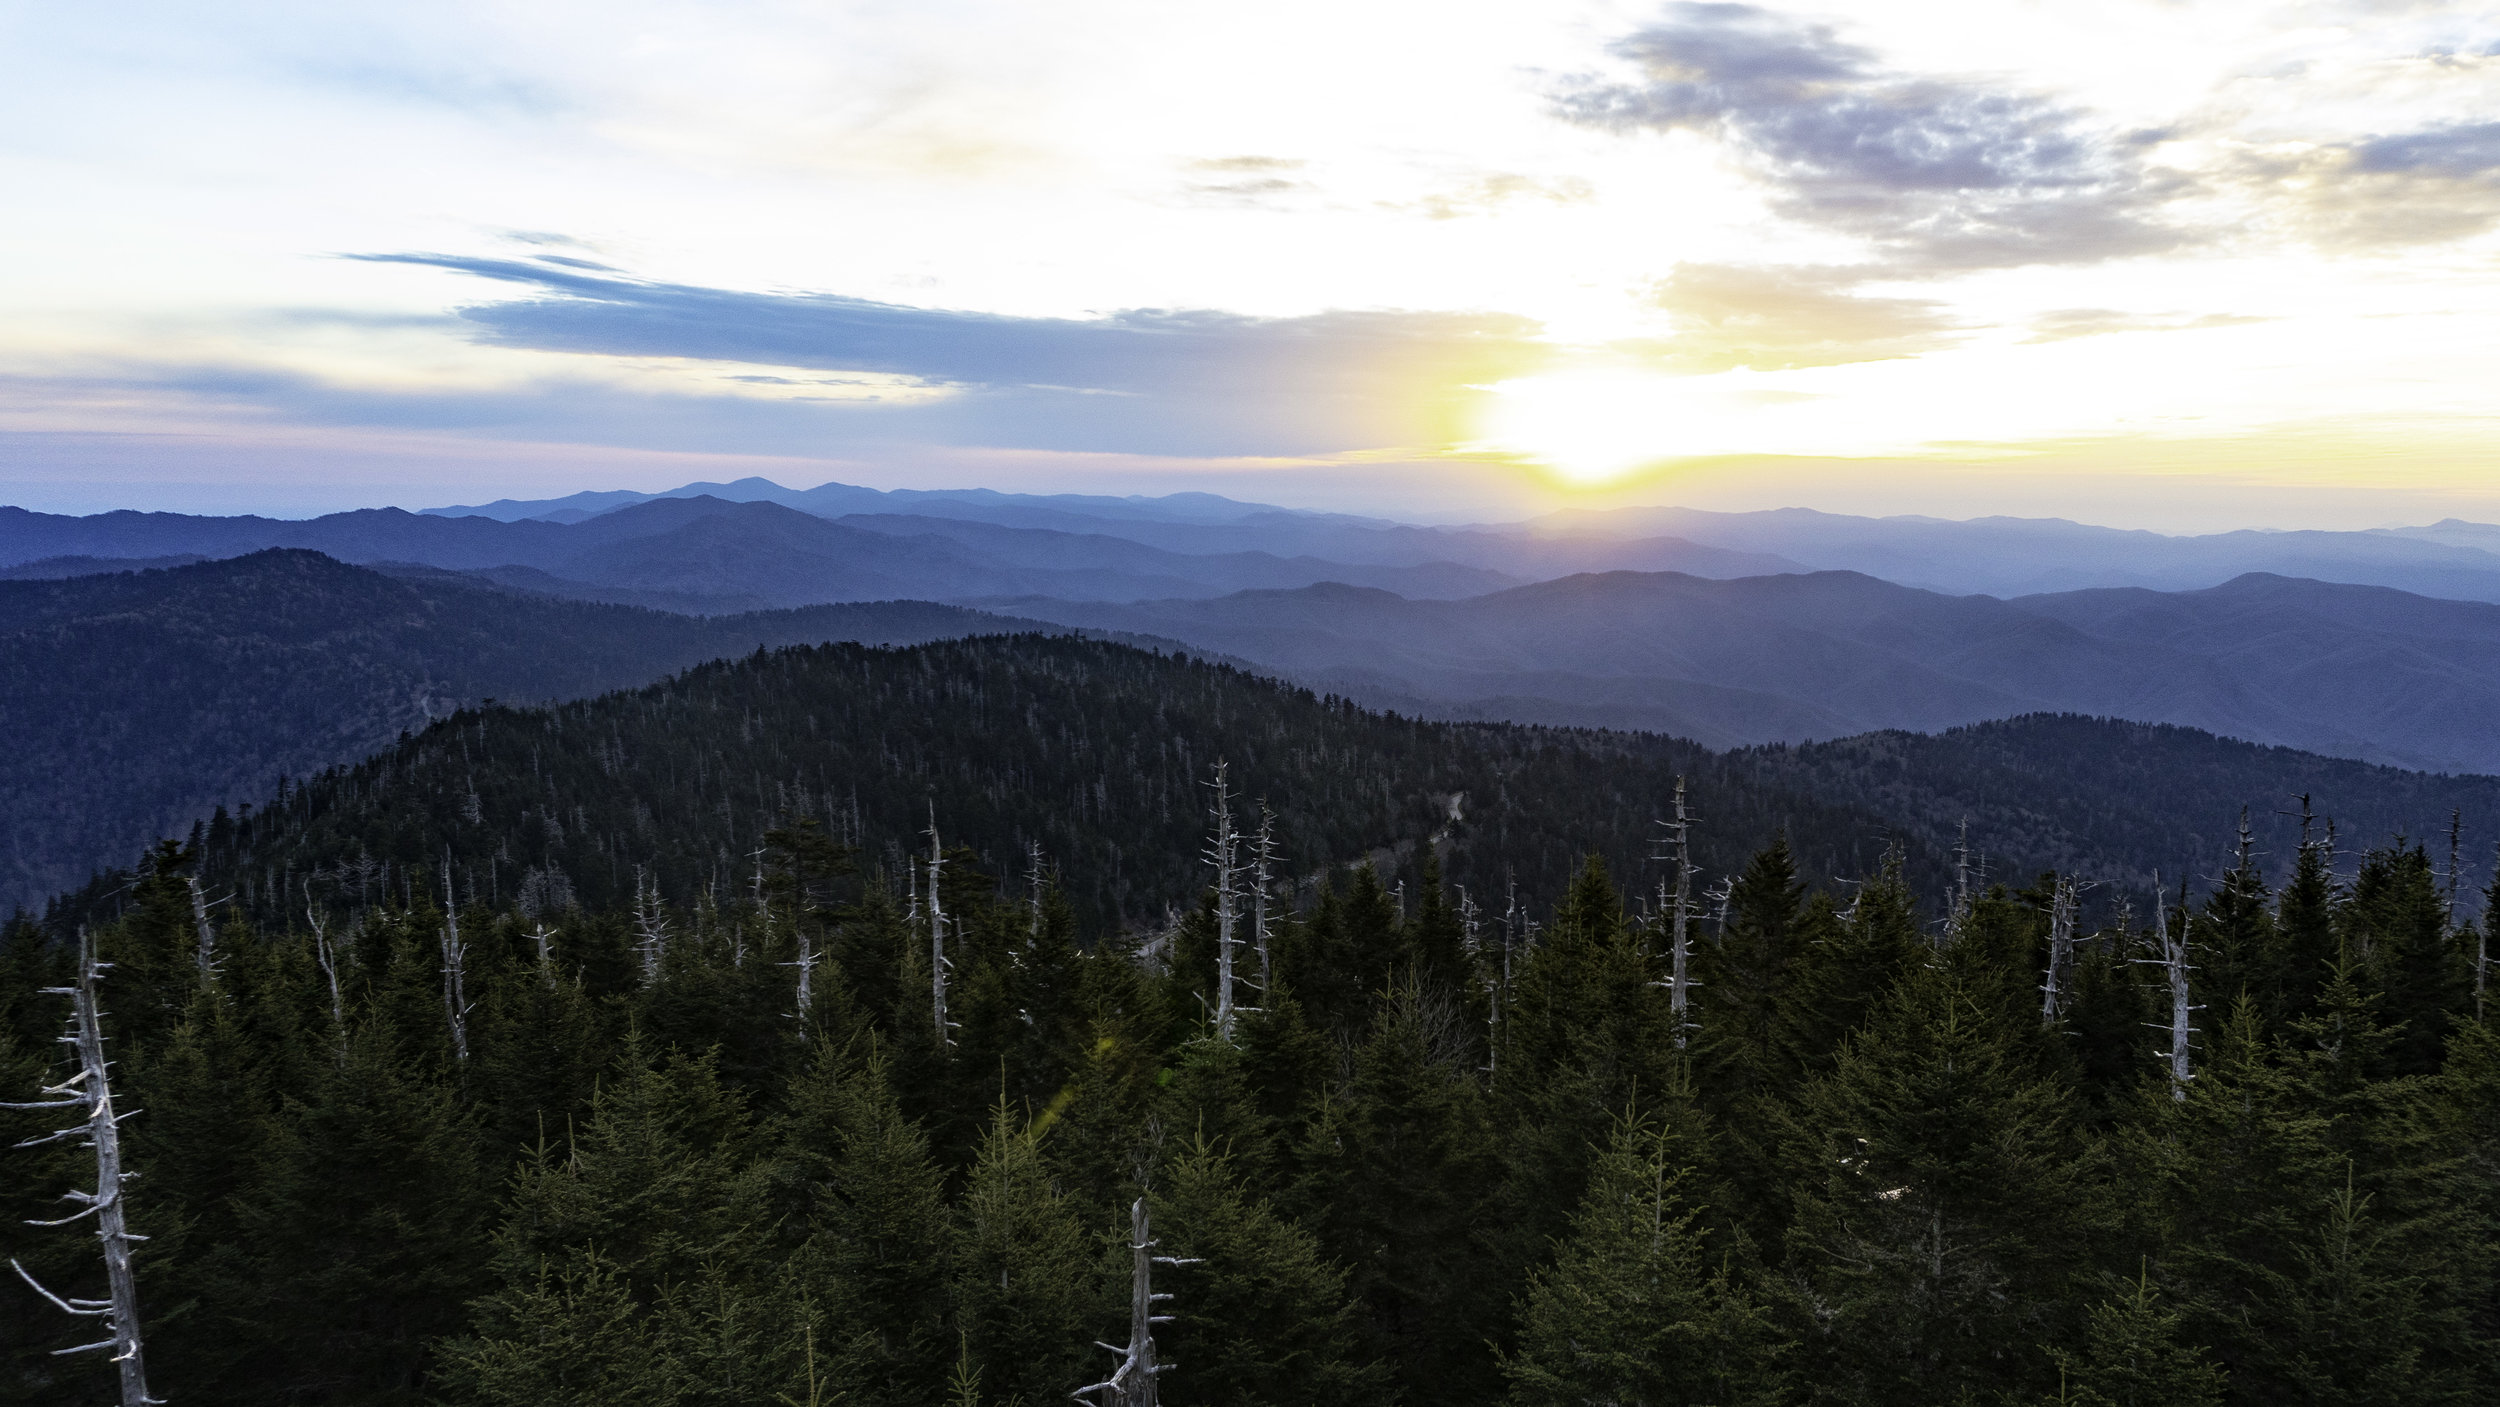  And finally, a Clingmans Dome sunrise shot 